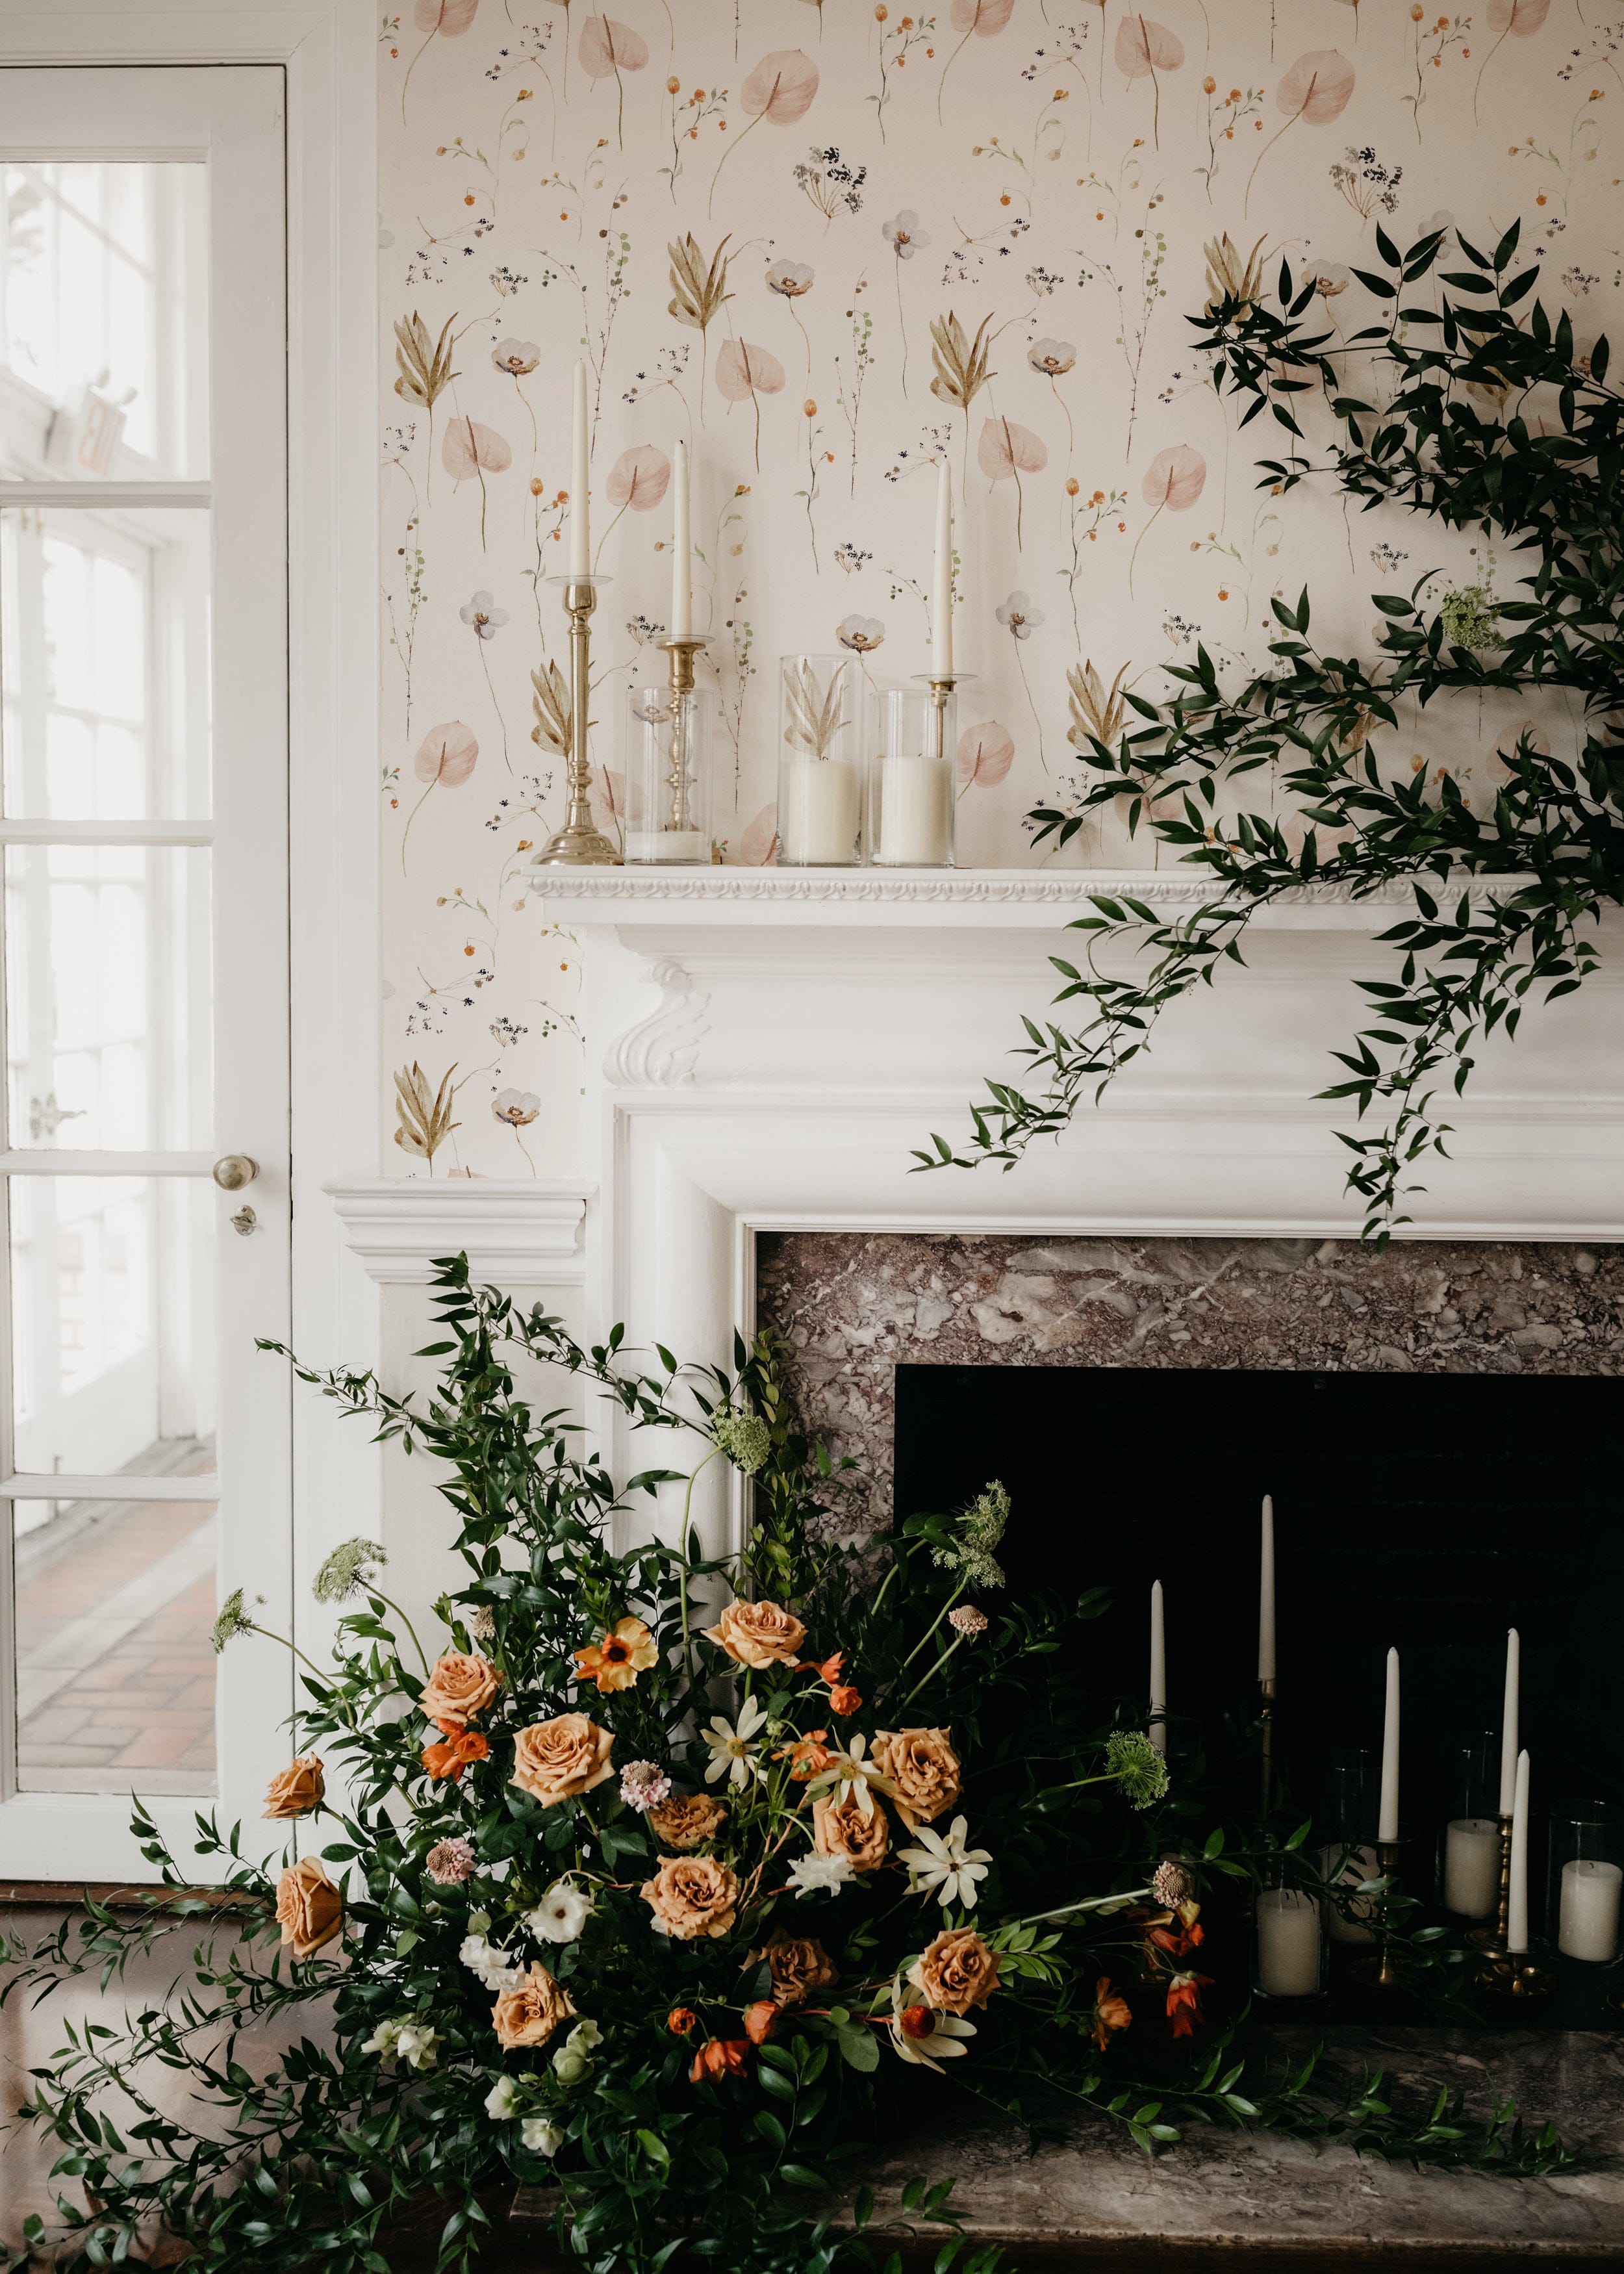 An elegant living space with Ikebana Floral Wallpaper, depicting soft-colored florals against a white background, alongside a classic white fireplace adorned with fresh greenery and tall candles, invoking a sense of sophisticated tranquility.